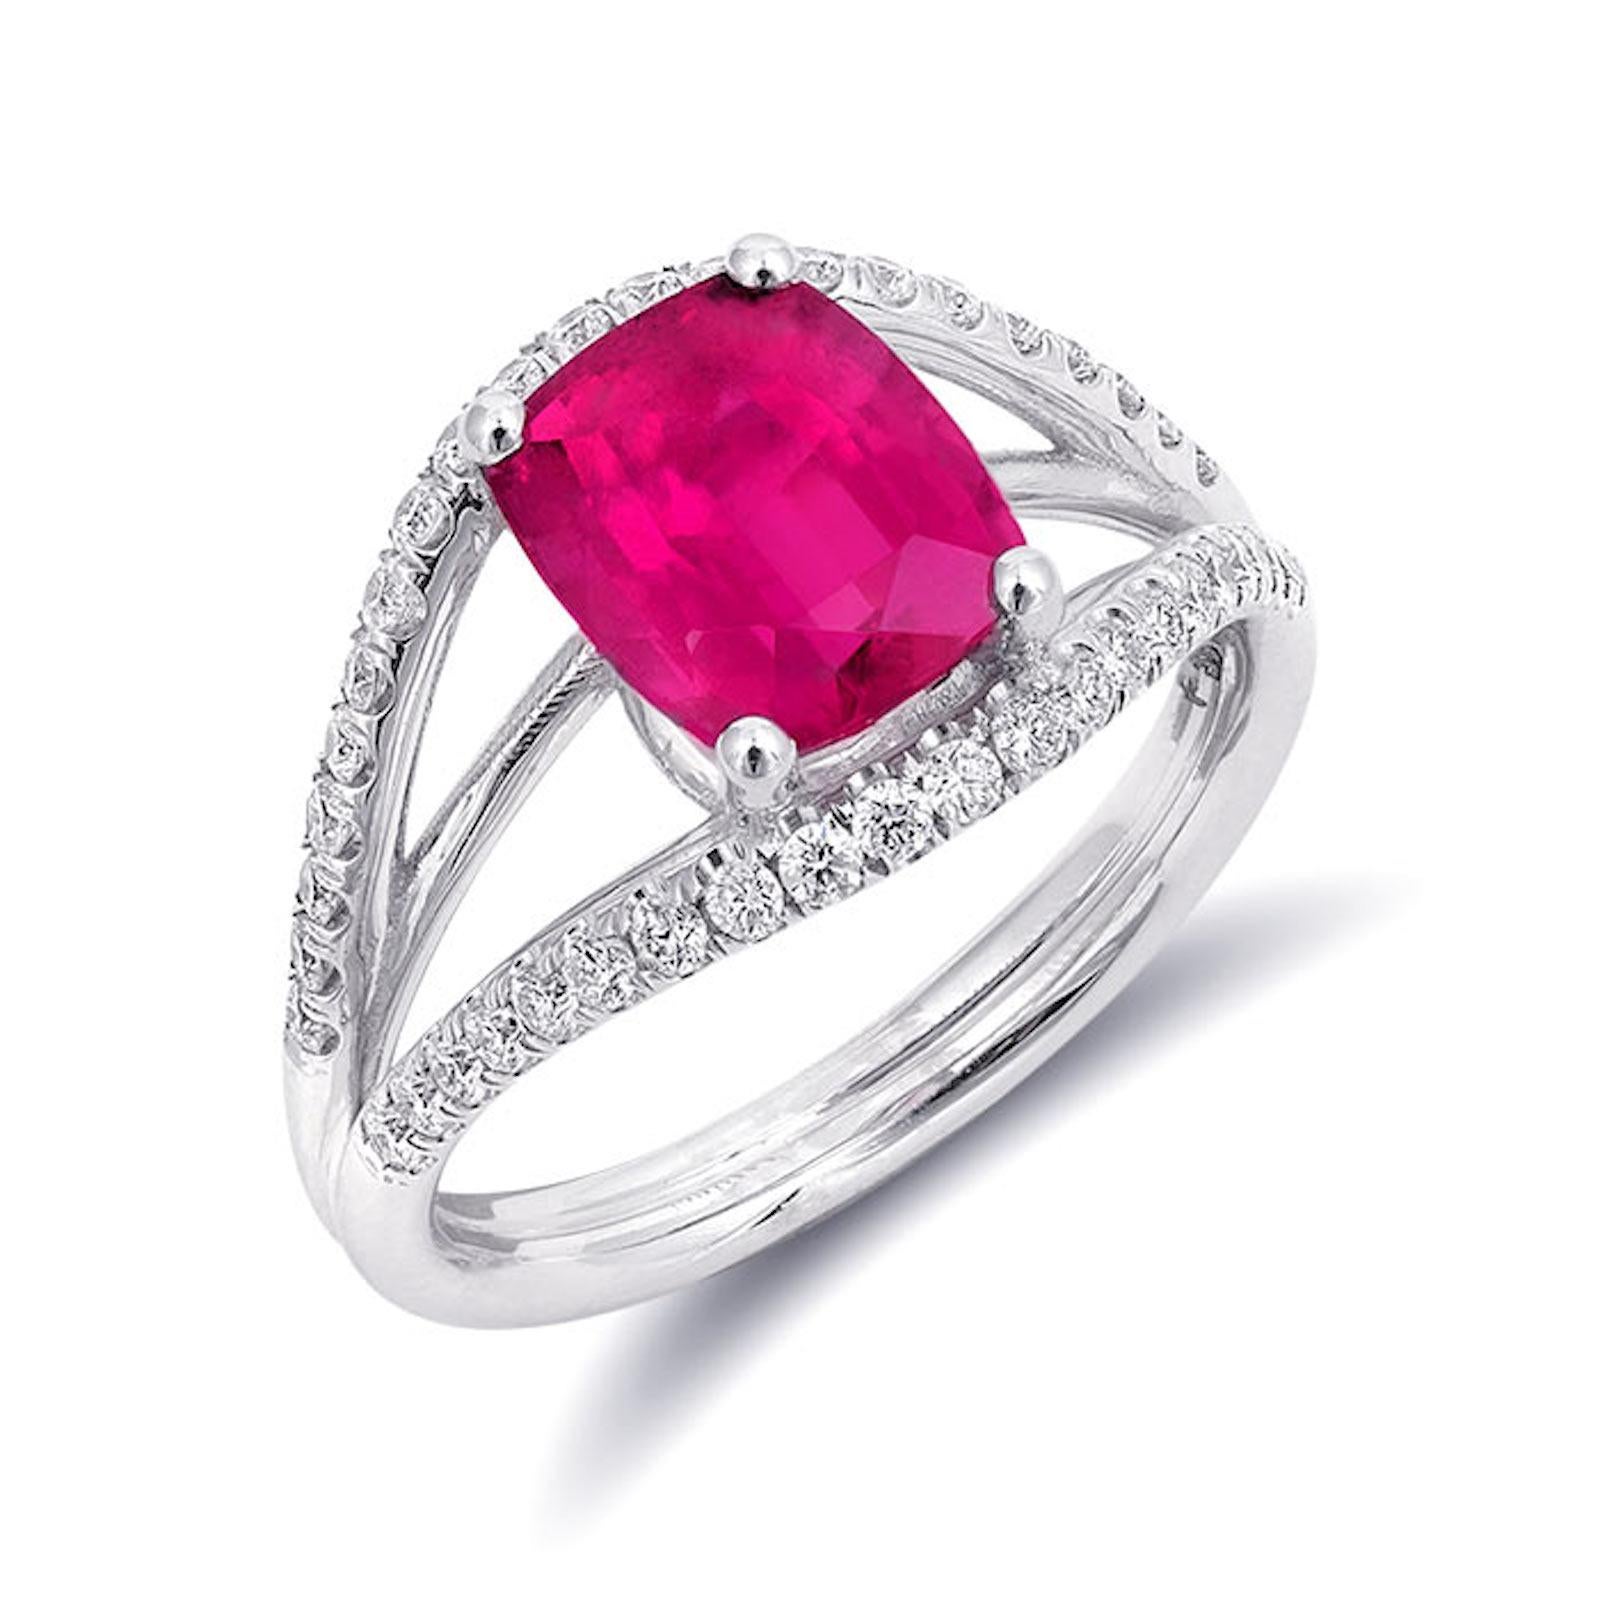 2.15 Carats Pink Tourmaline Diamonds set in 14K White Gold Ring In New Condition For Sale In Los Angeles, CA